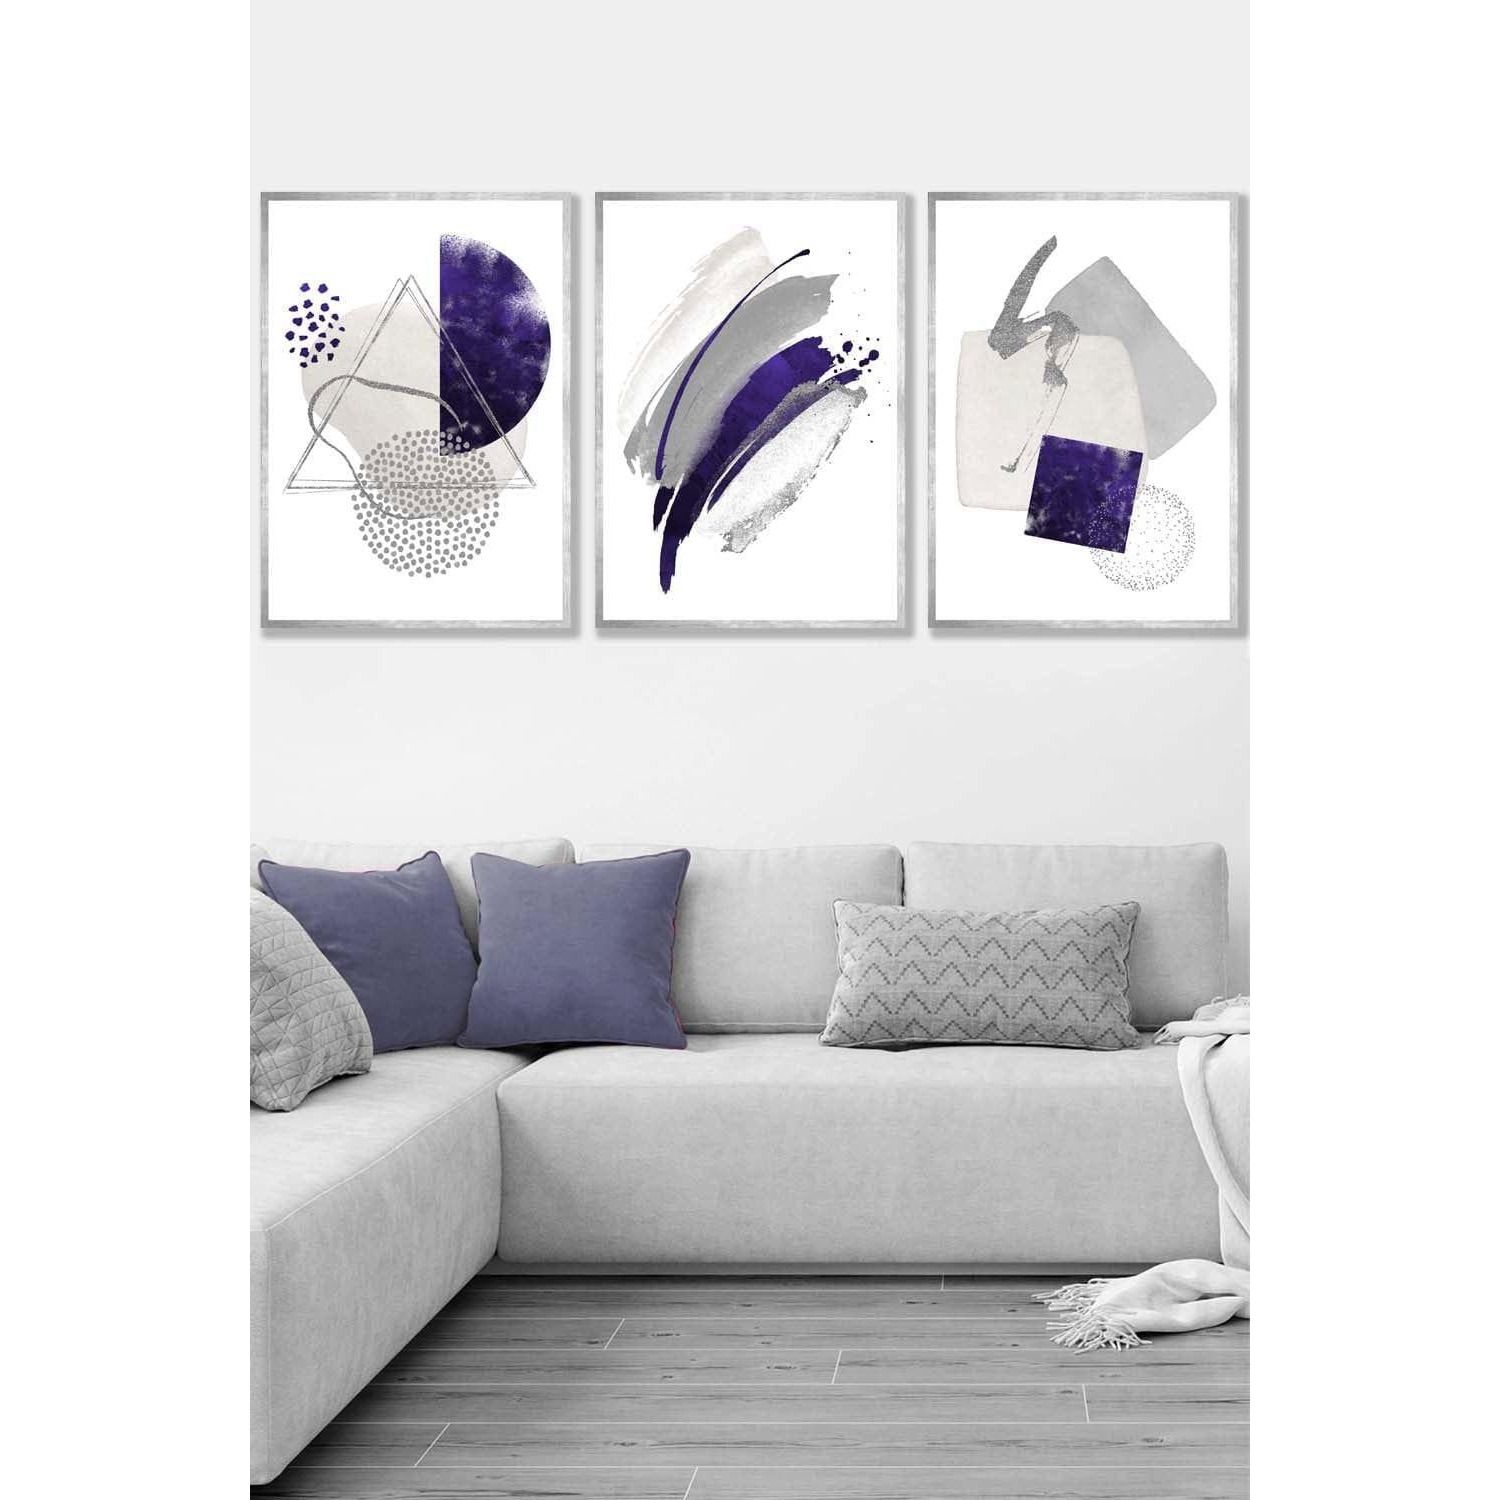 Set of 3 Silver Framed Abstract Purple Silver Watercolour Shapes Wall Art - image 1